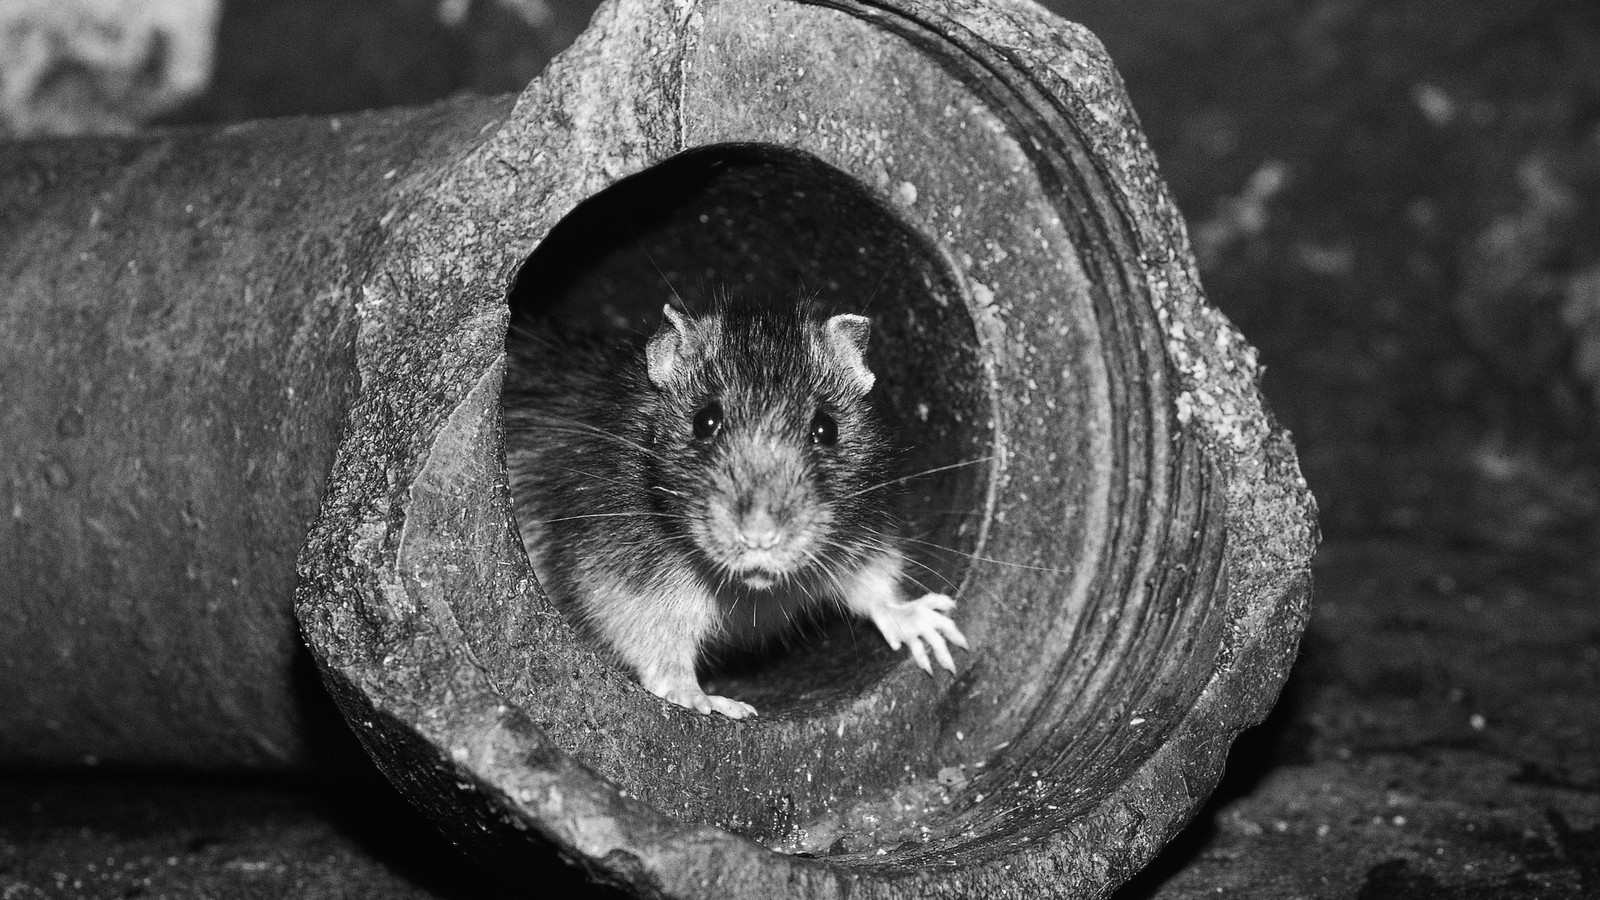 Rats Learned to Hide and Seek. Scientists Learned Way More. - The Atlantic